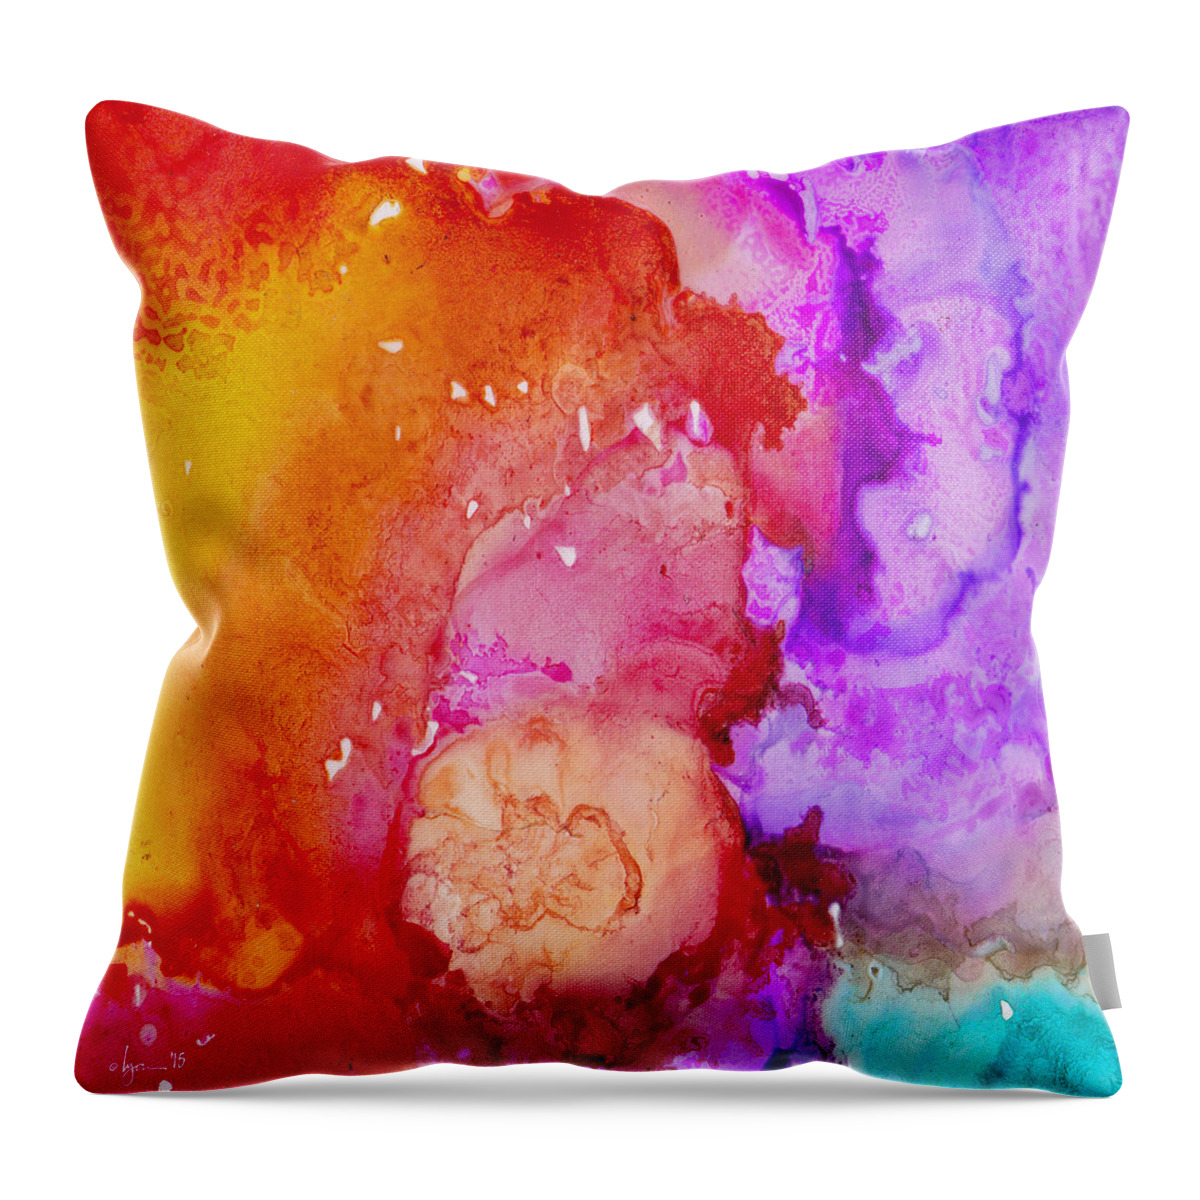 Tropical Throw Pillow featuring the painting On Fire by Angela Treat Lyon